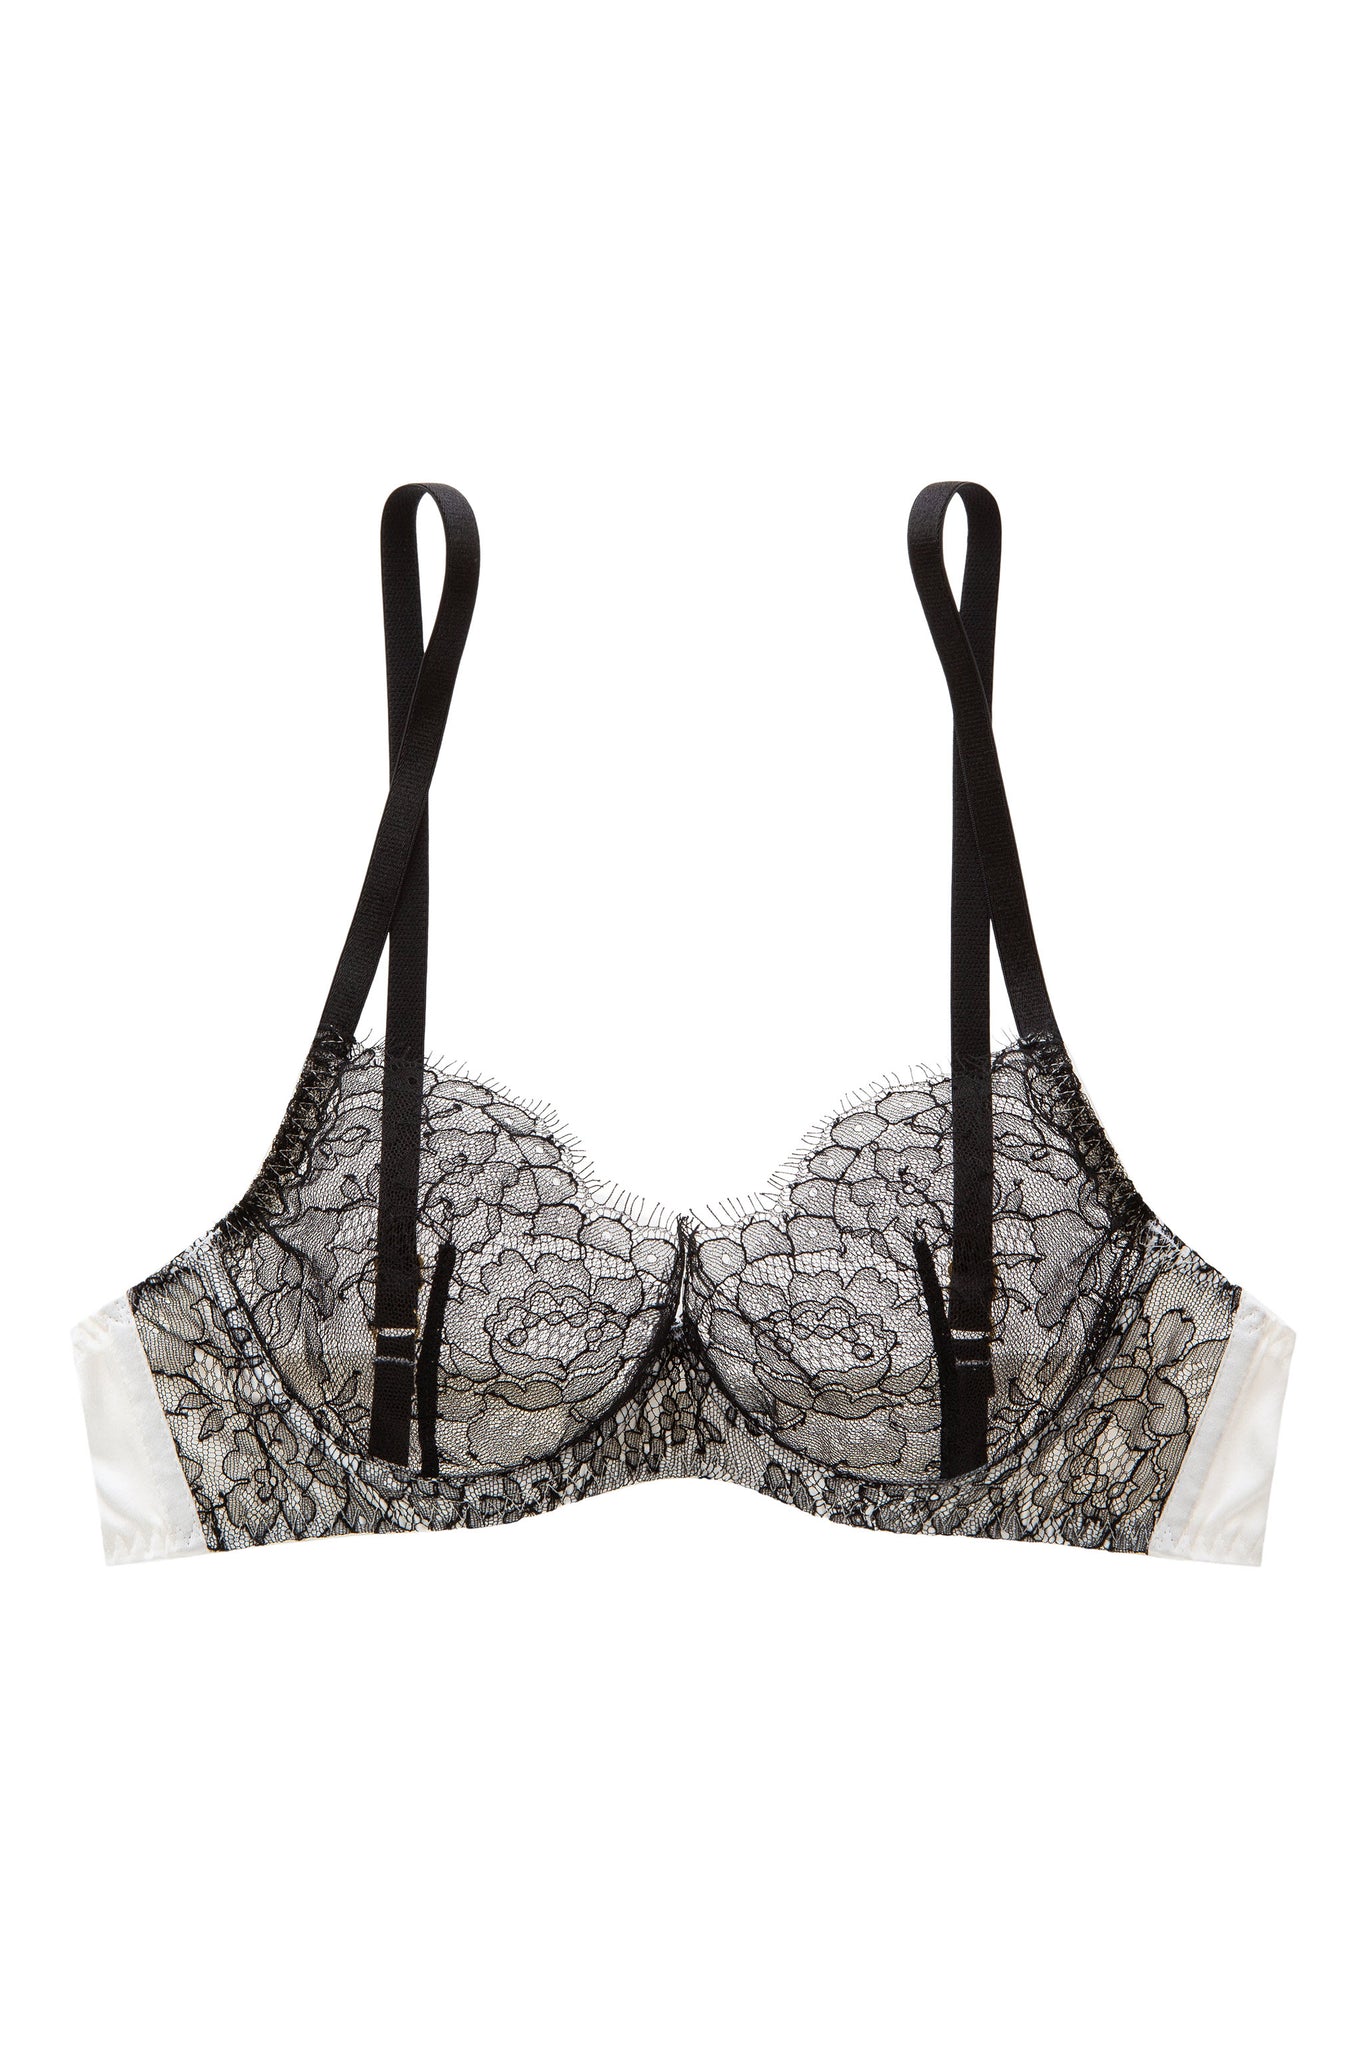 New Arrival ** Sandra silk satin and French Chantilly lace bra